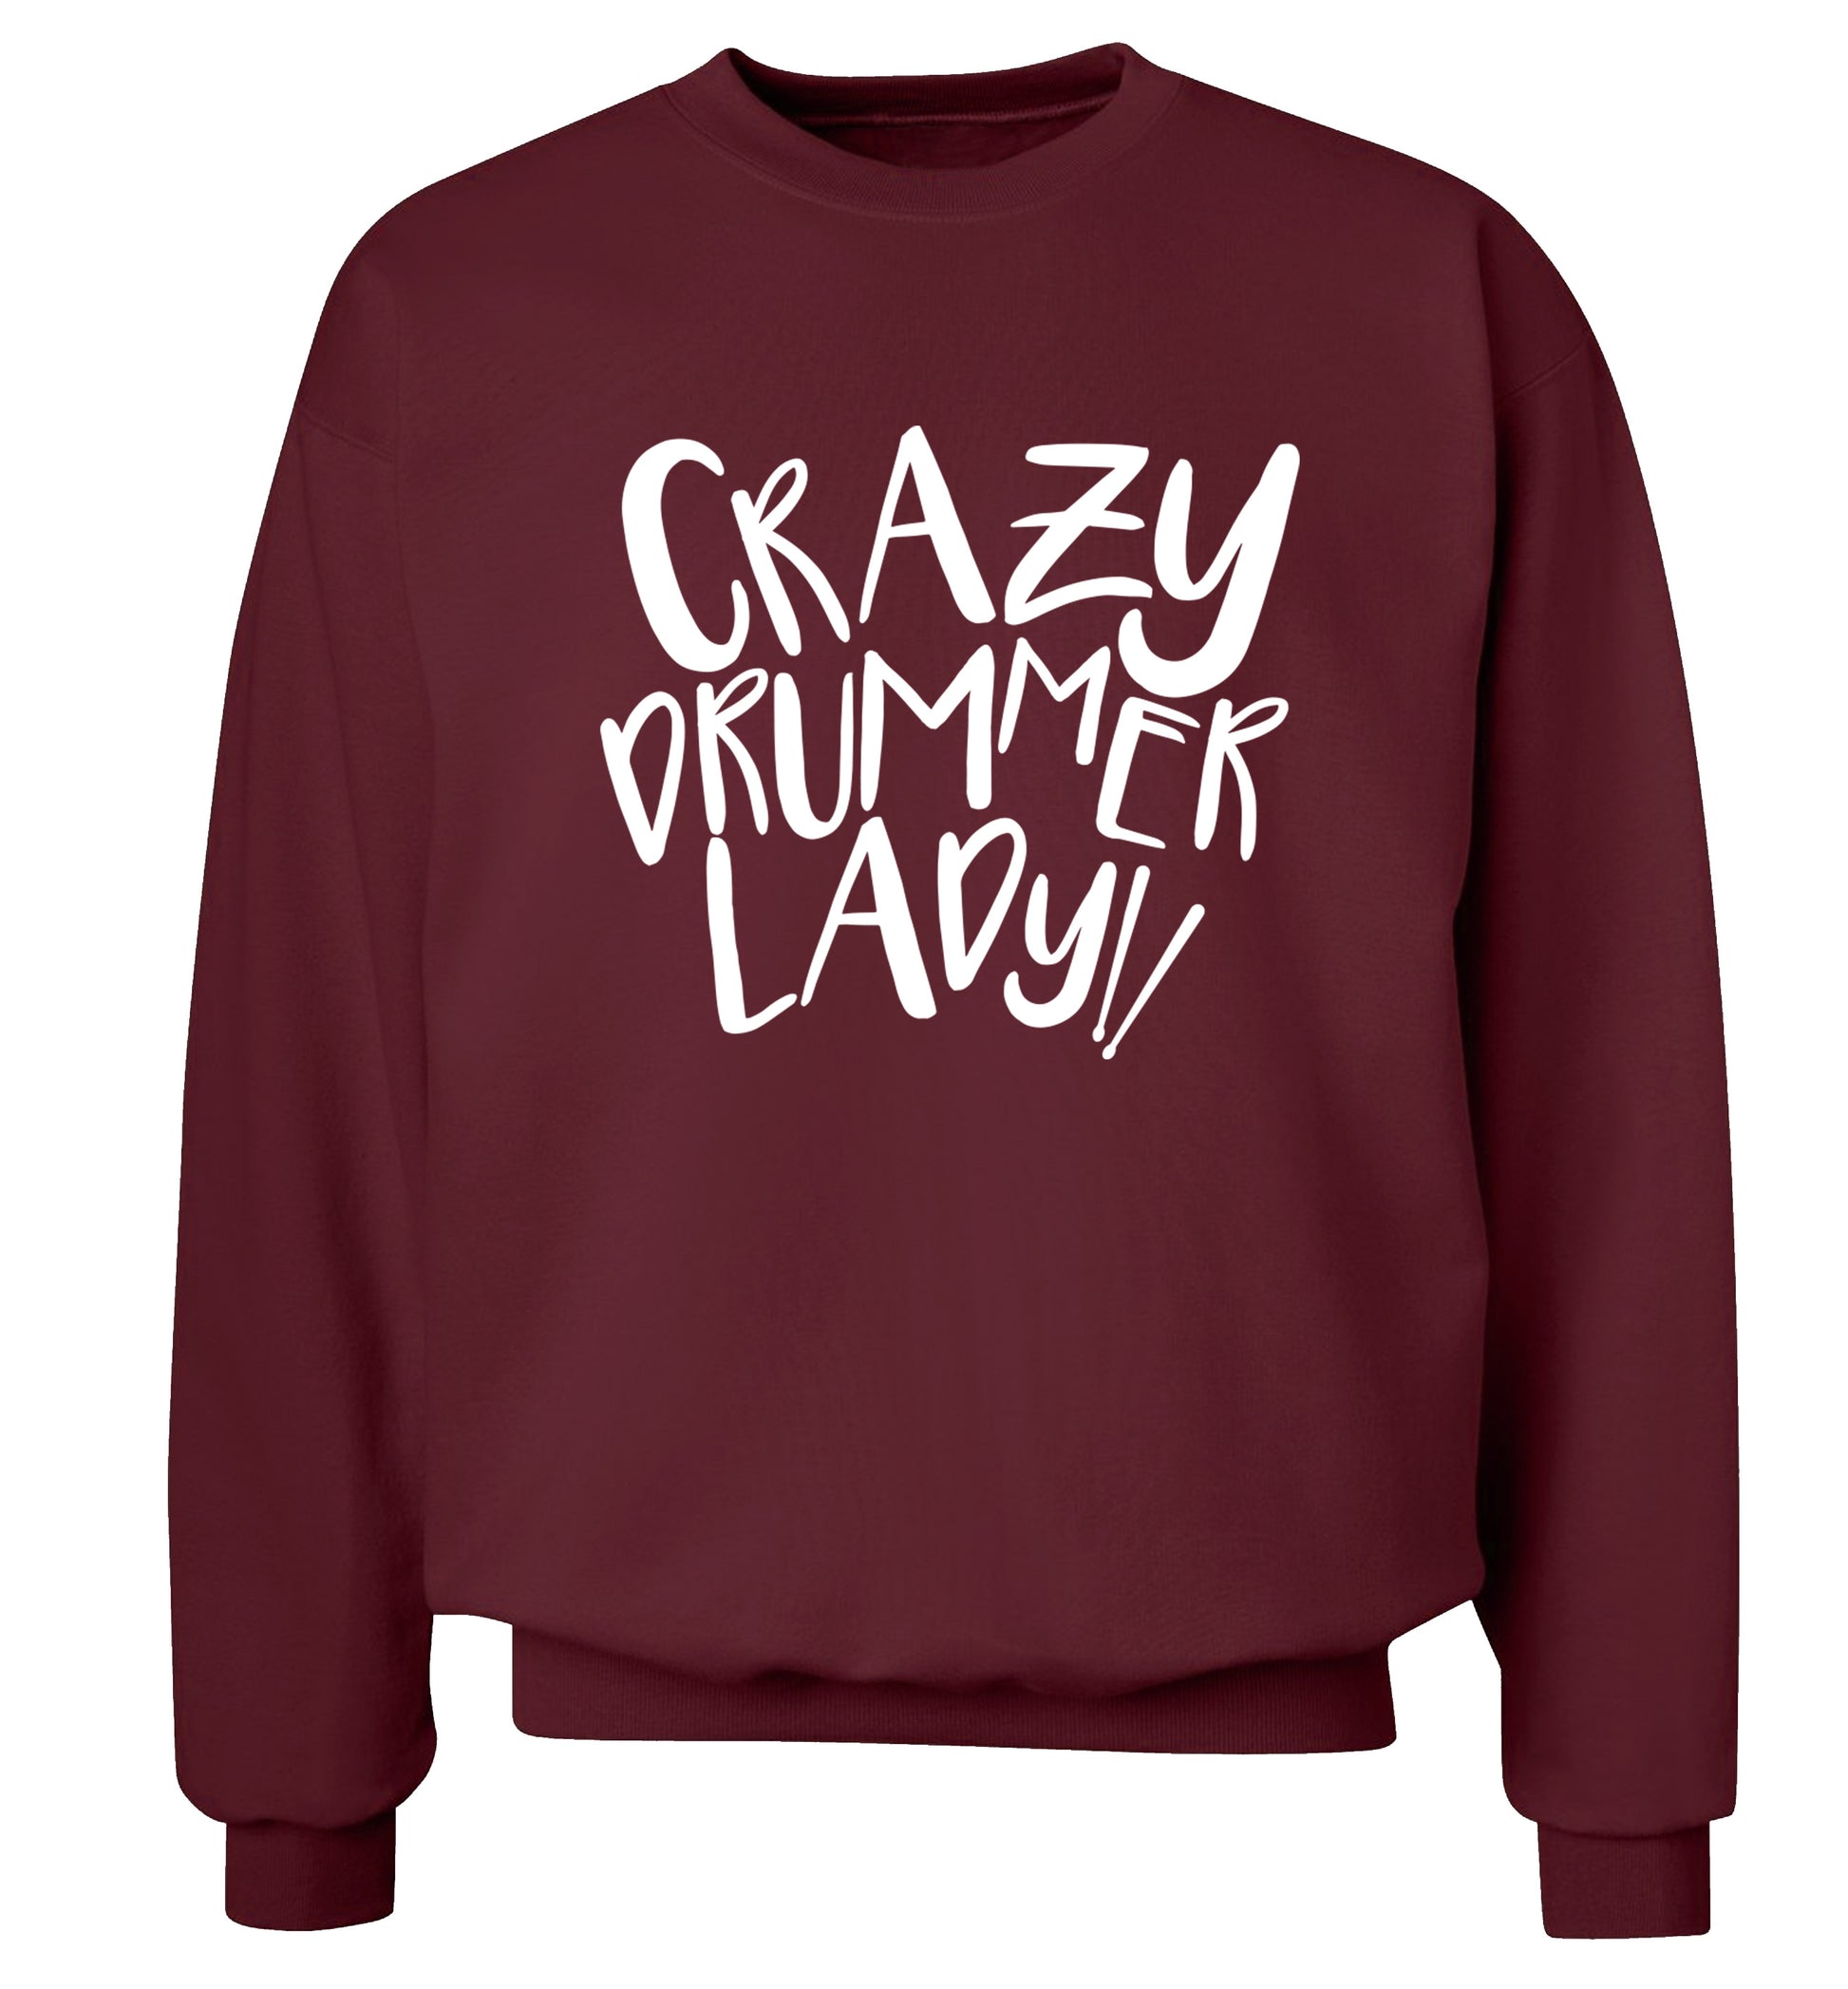 Crazy drummer lady Adult's unisex maroon Sweater 2XL